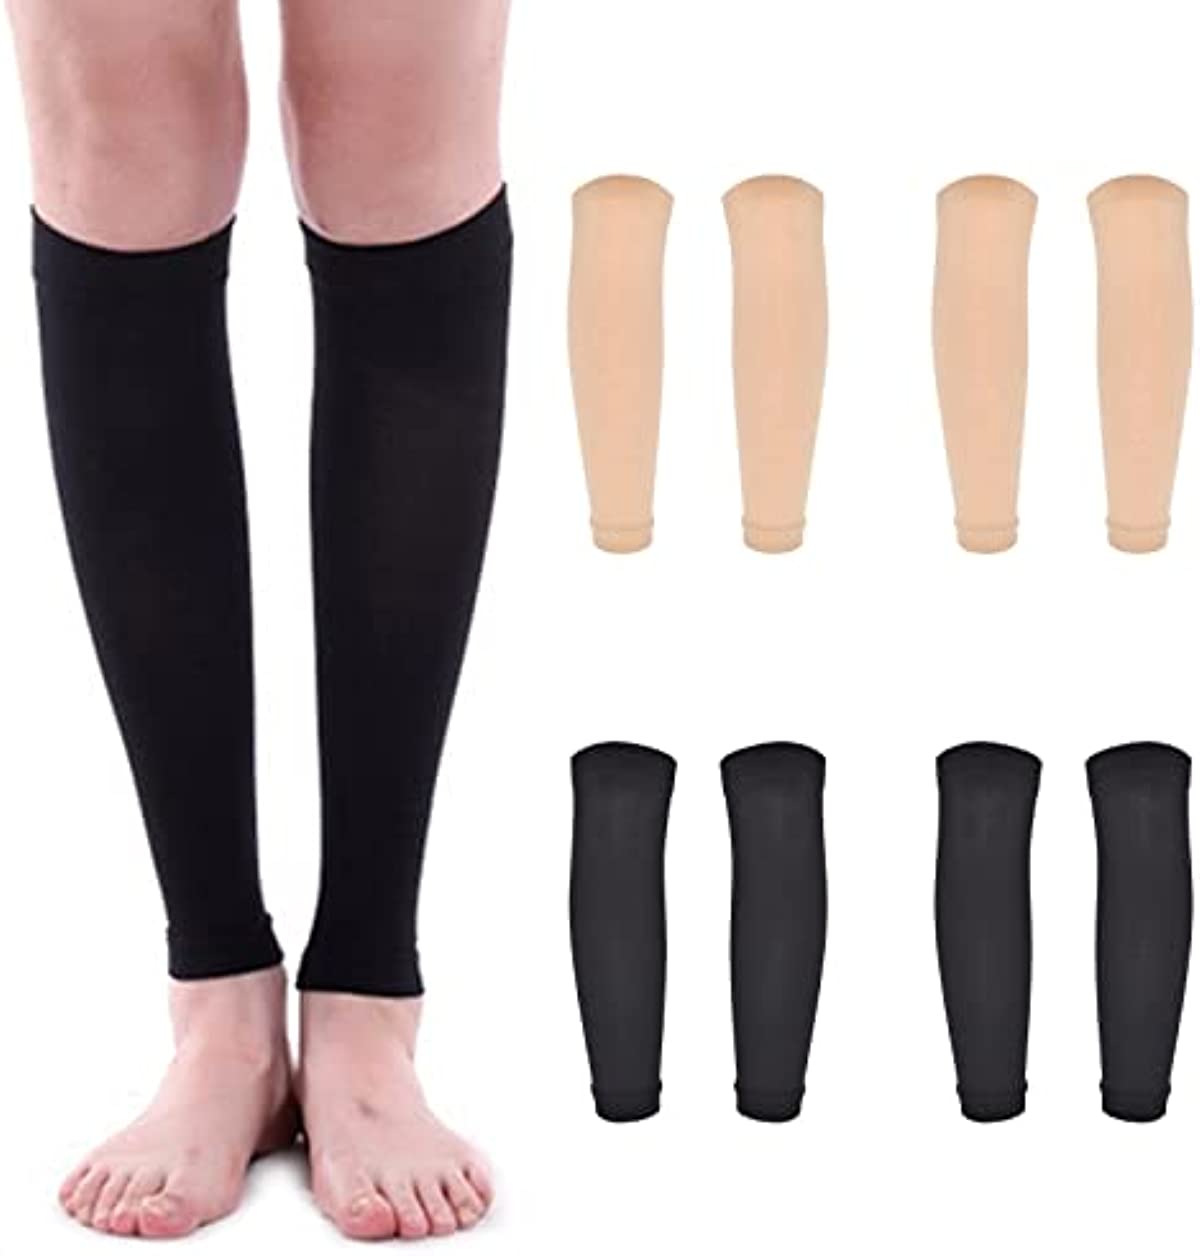 ATENTO 4 Pairs Calf Compression Sleeves for Women & Men - Wide Leg Footless Sleeve Compression Socks for Fitness -Support and Relief for Shin Splints, Varicose Veins, Sore Muscles + Joints, Strains (XX-Large, 2 Nude, 2 Black)